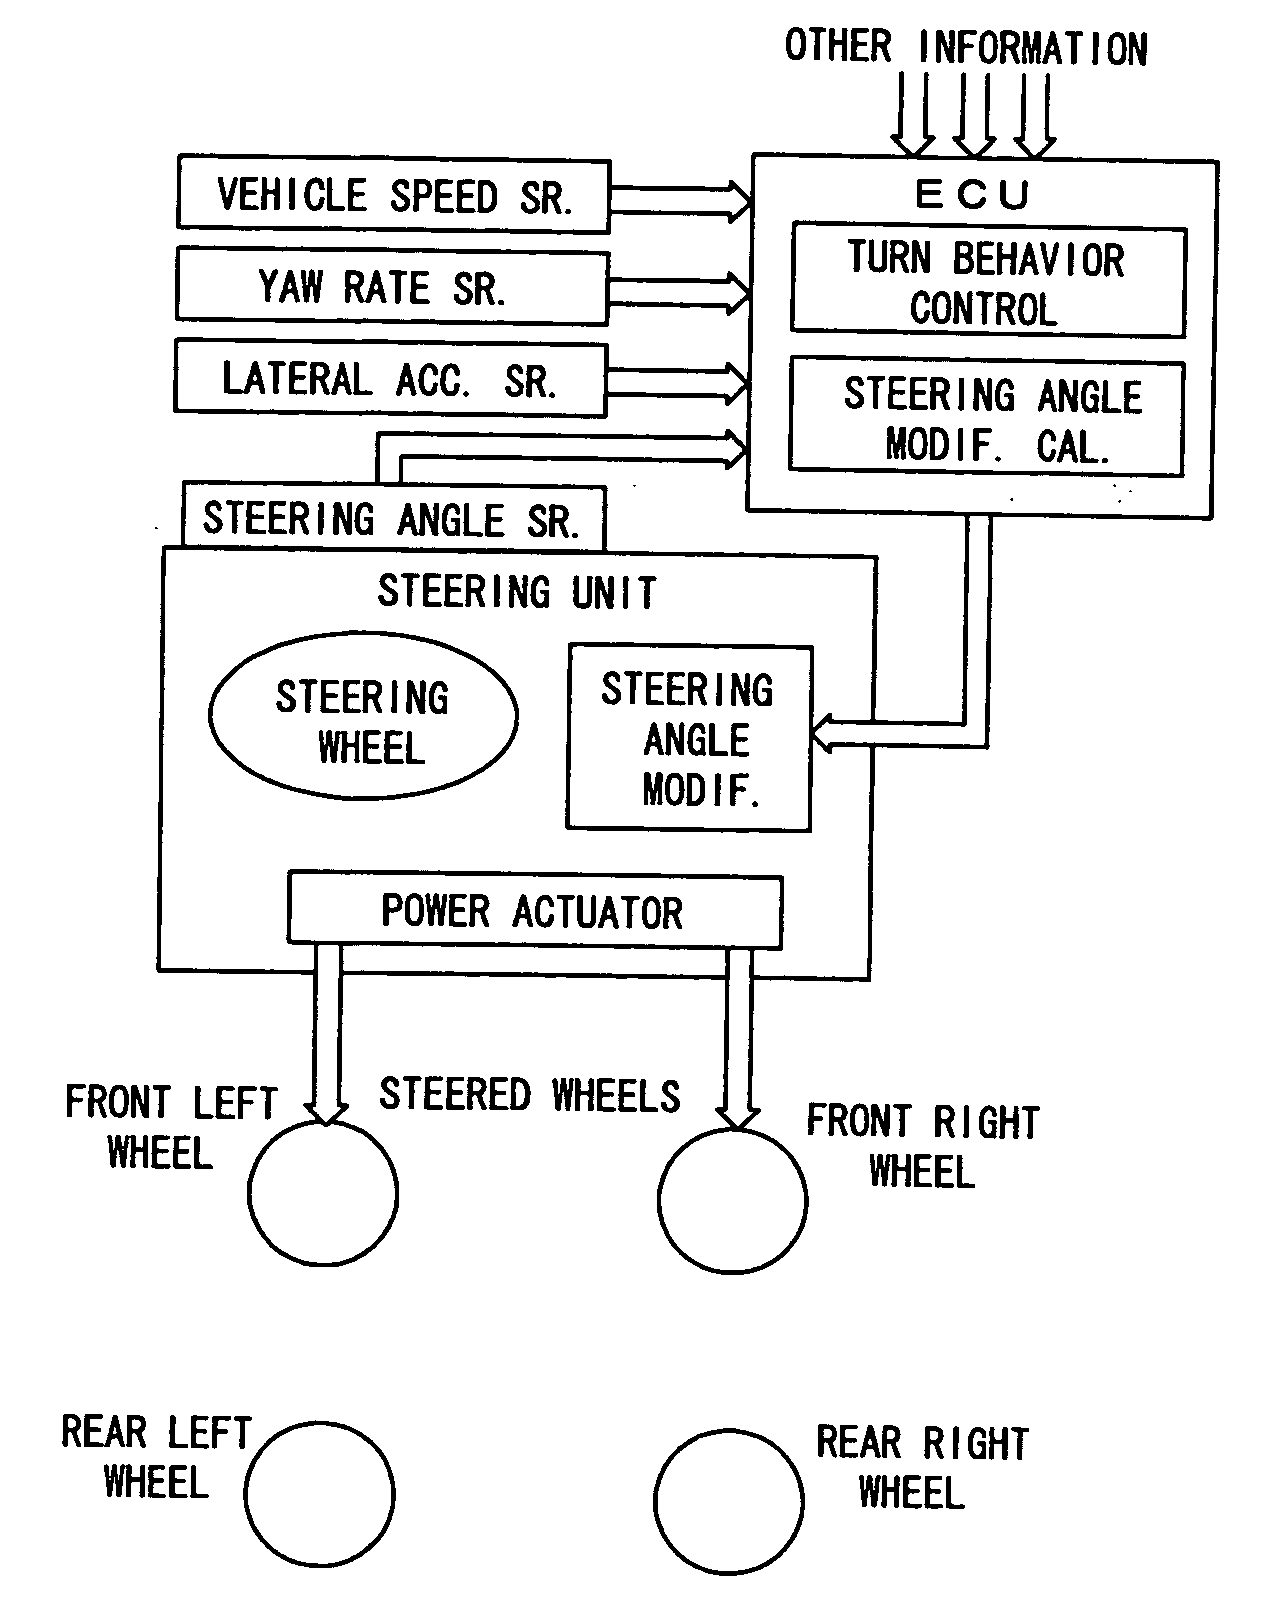 Vehicle counting counter-steer operation by driver in oversteer suppress control